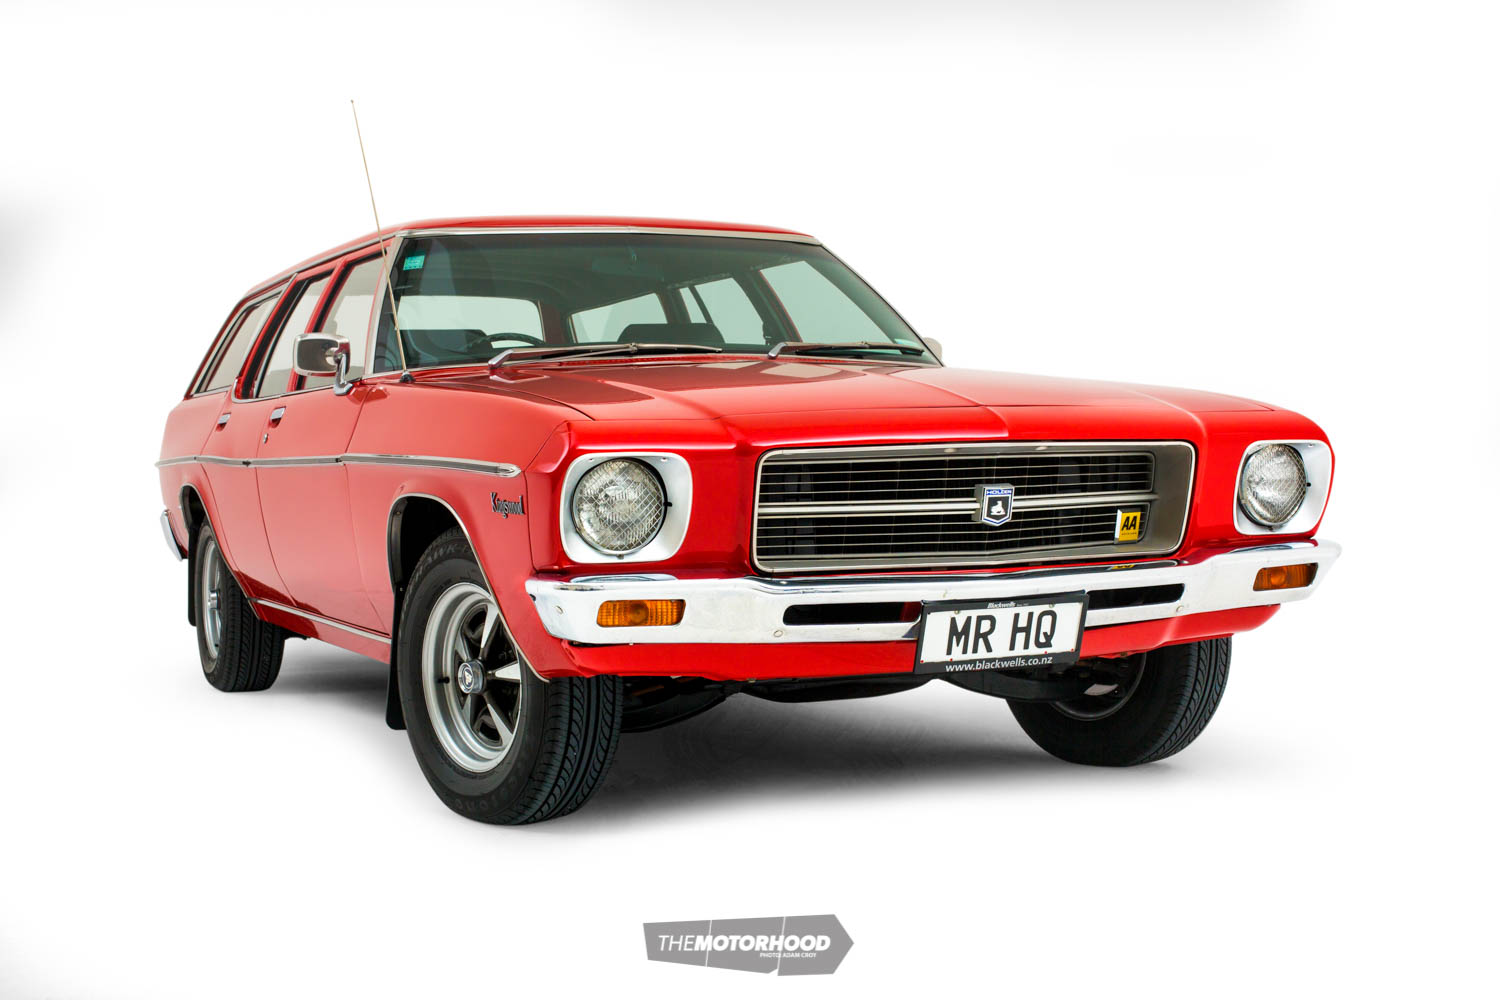 A Great Way To Move 1974 Hq Holden Kingswood Station Wagon